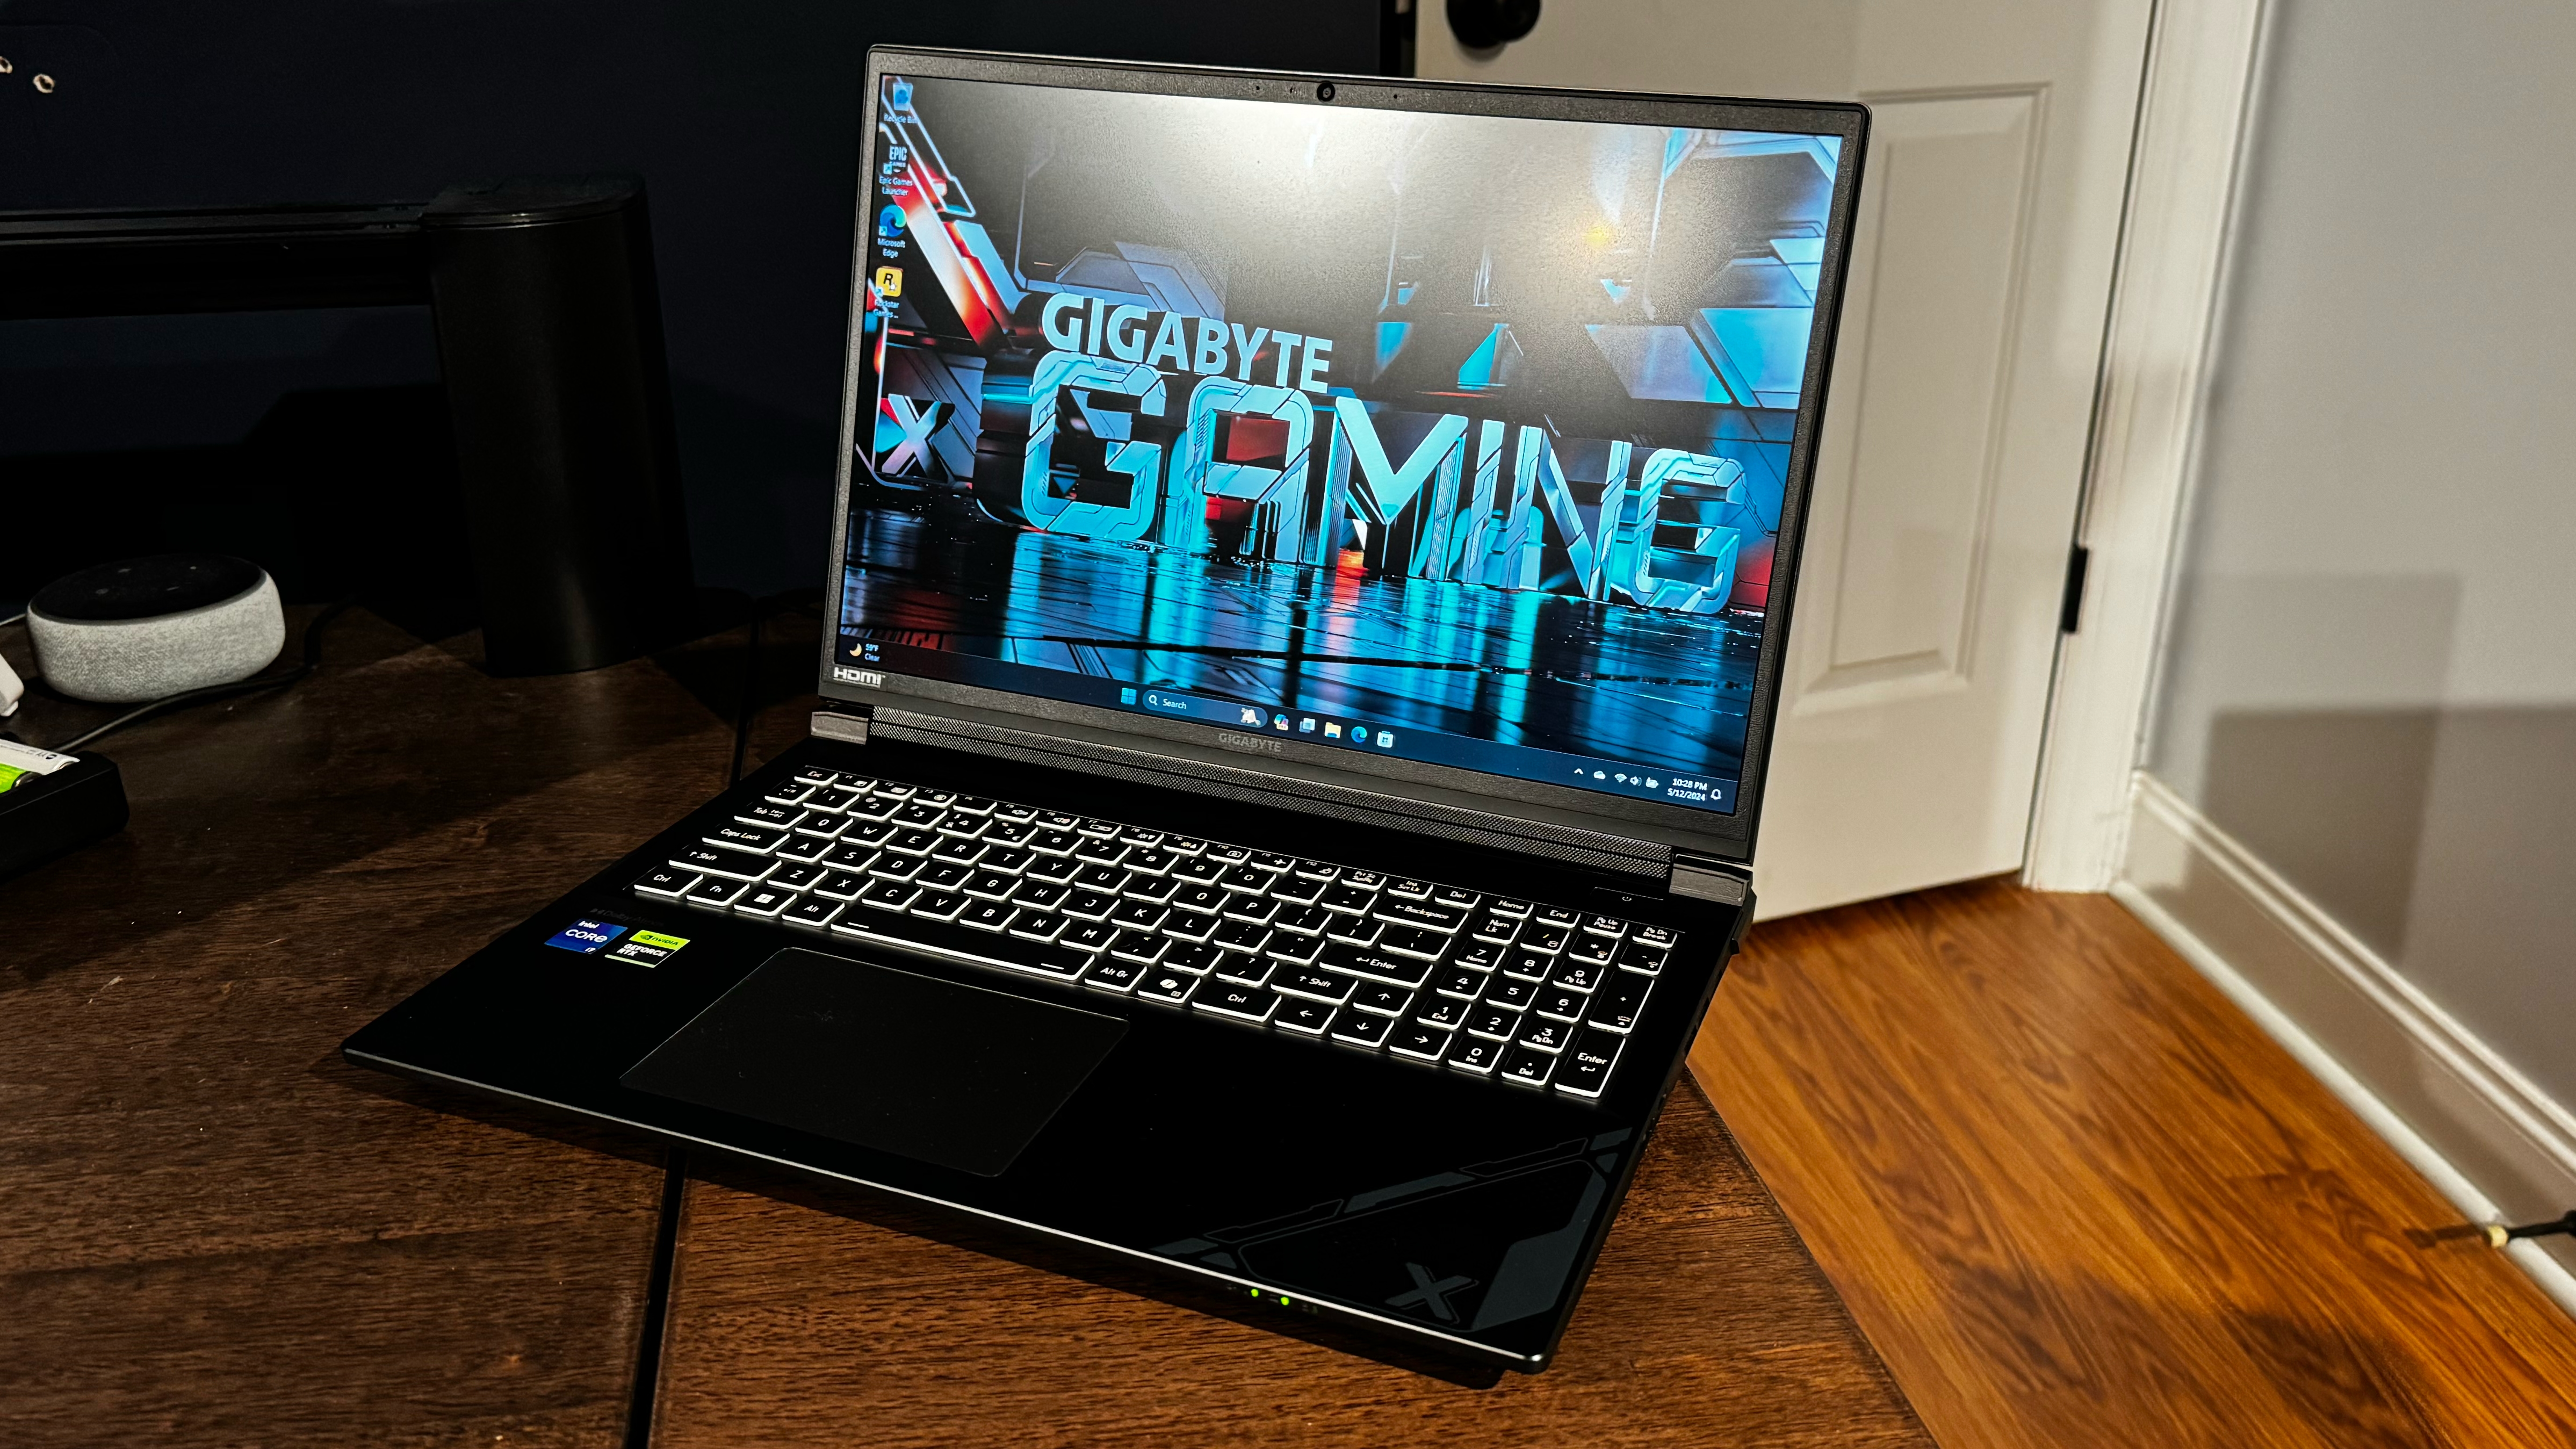 Gigabyte G6X gaming laptop review: Competent performance, but no standout features